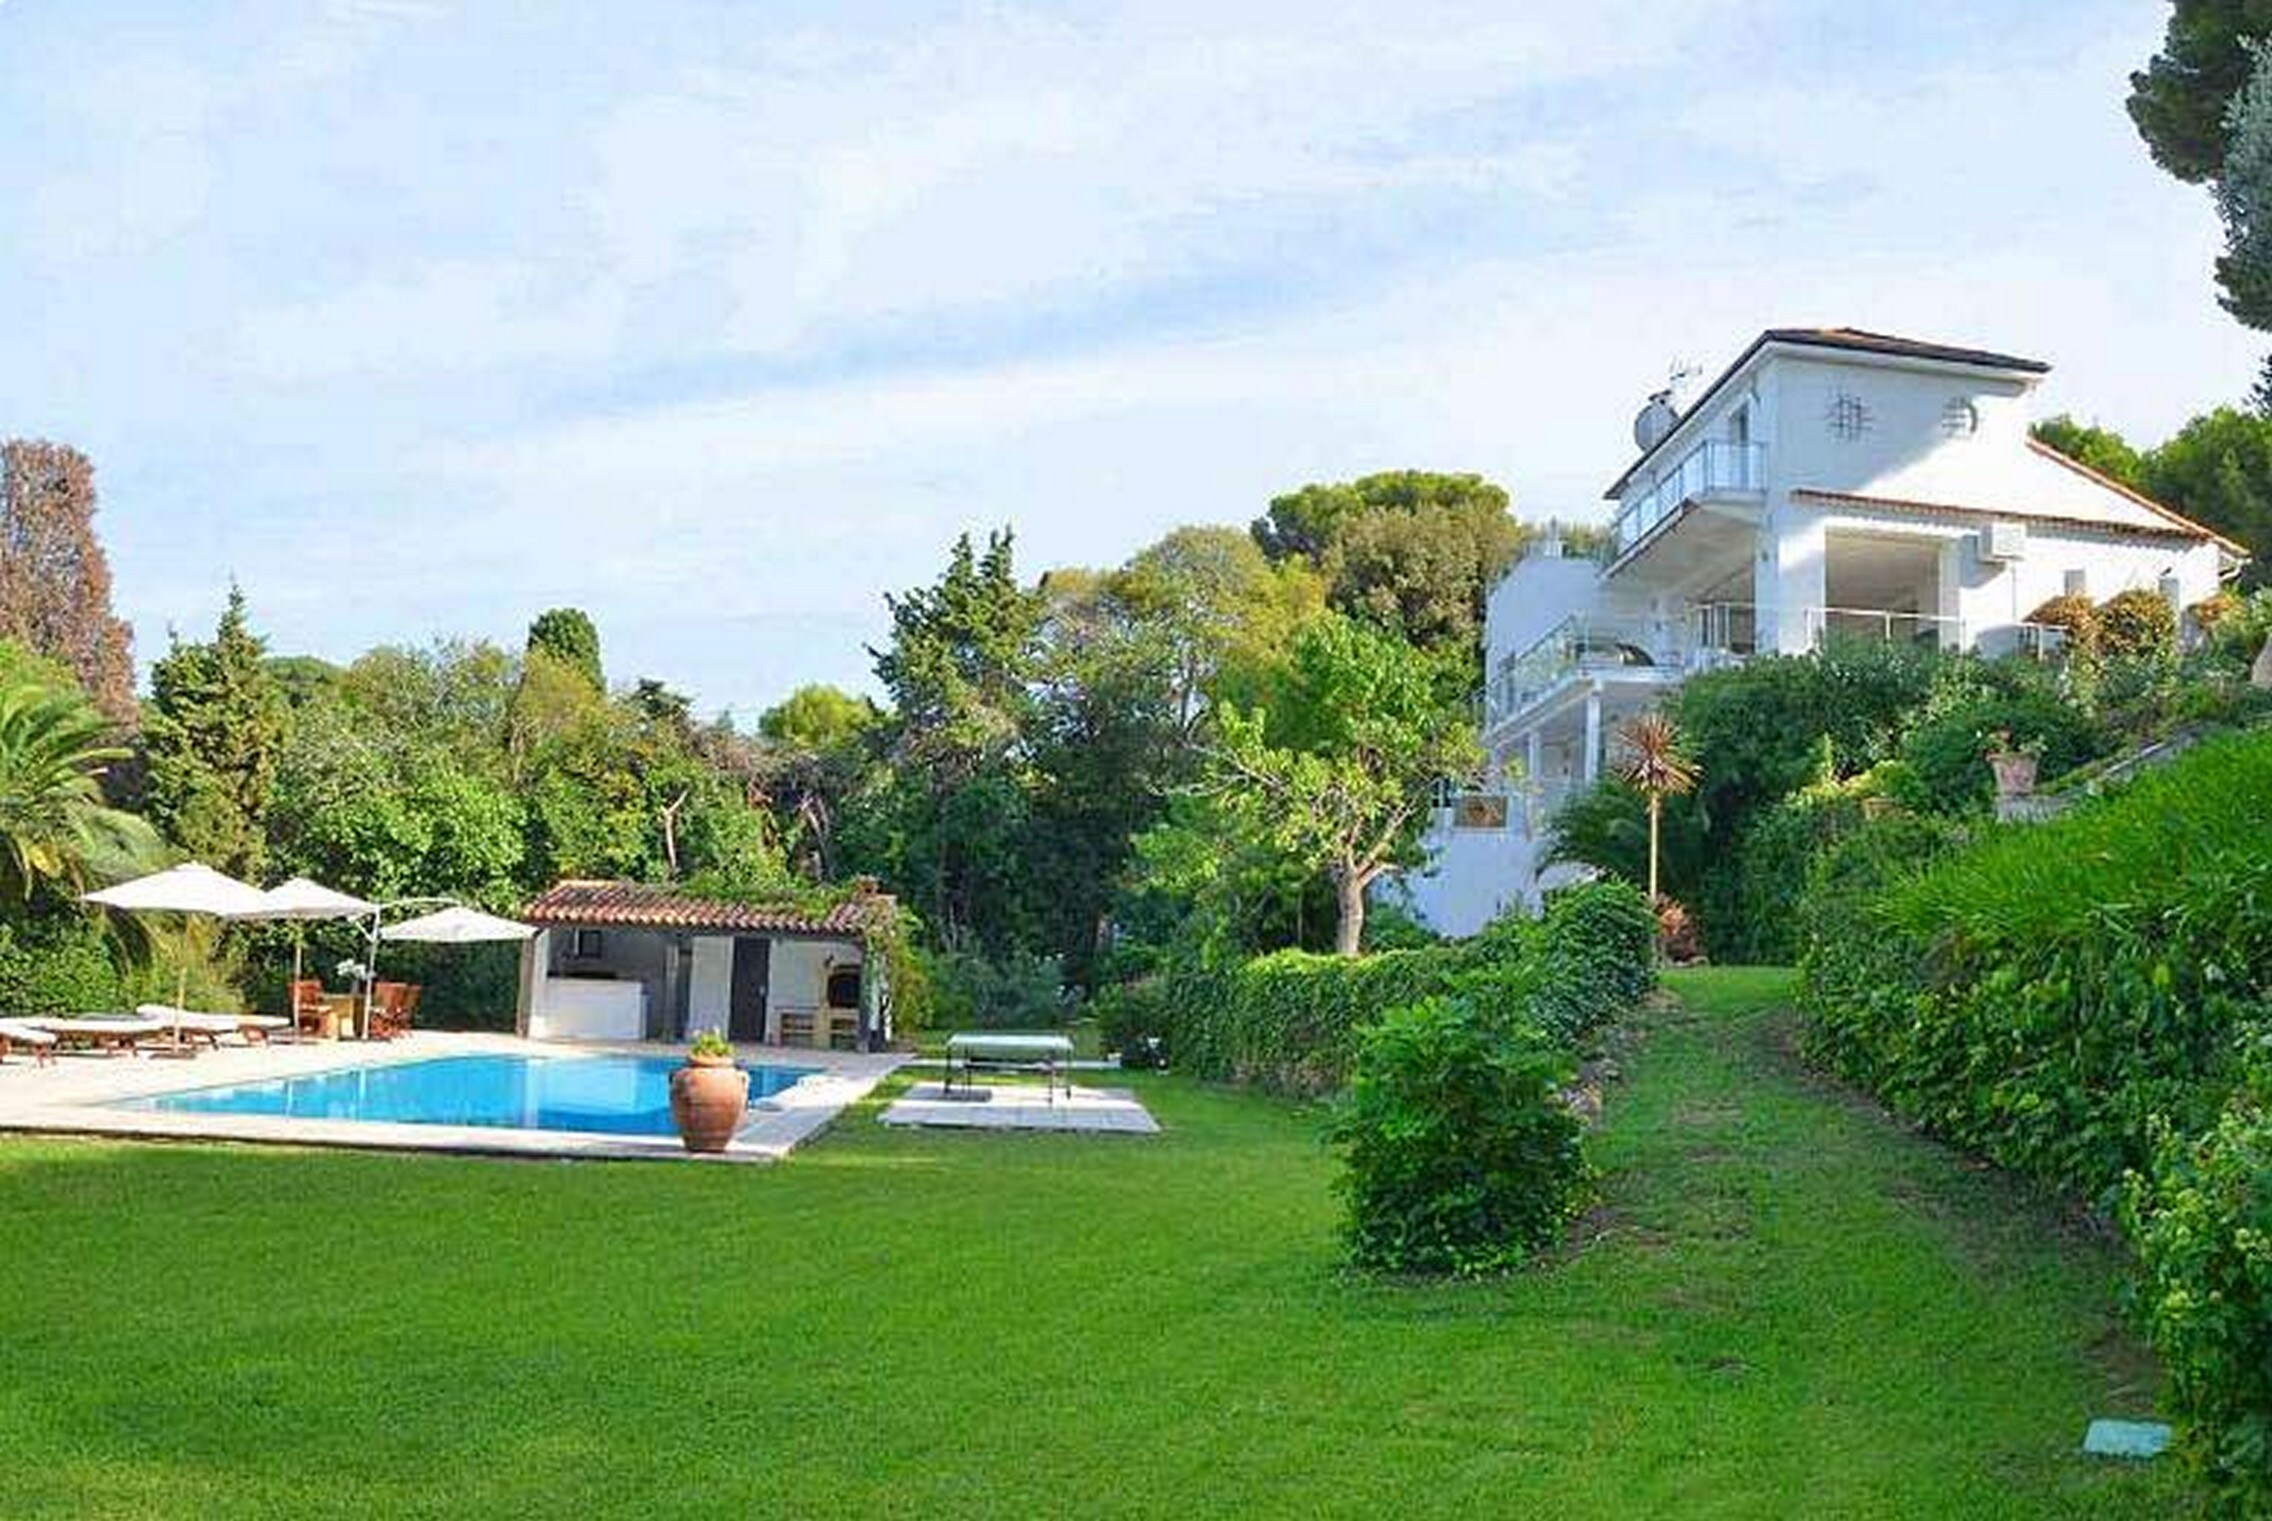 Property Image 2 - Stunning 5 bedroom period villa in superb location on the Cap d’Antibes